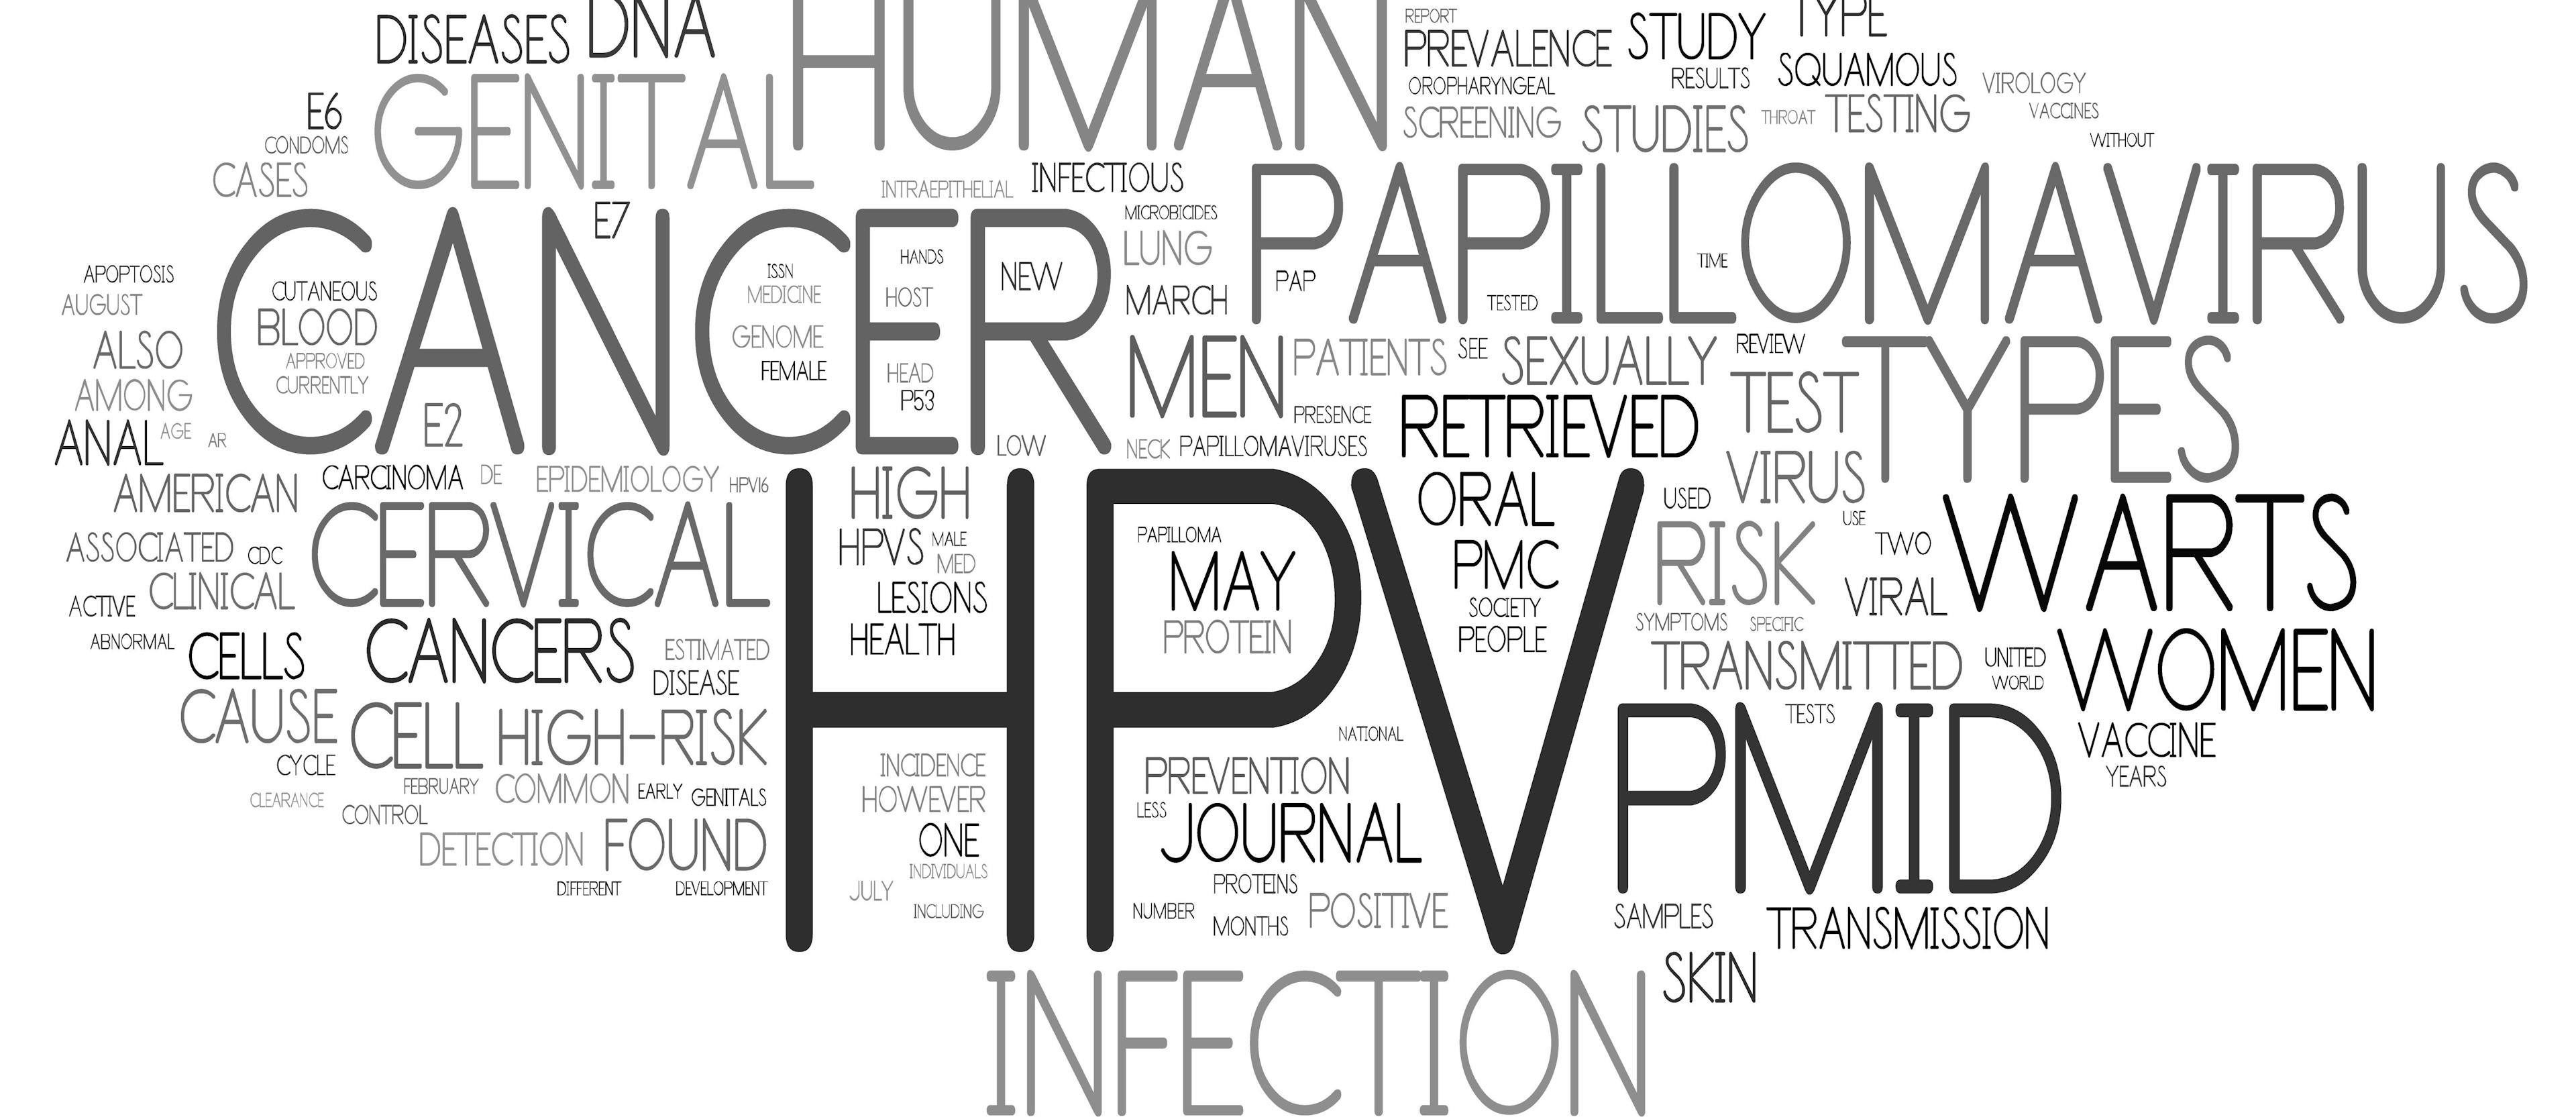 HPV Vaccine Considerably Reducing Cancer-Causing Virus Prevalence